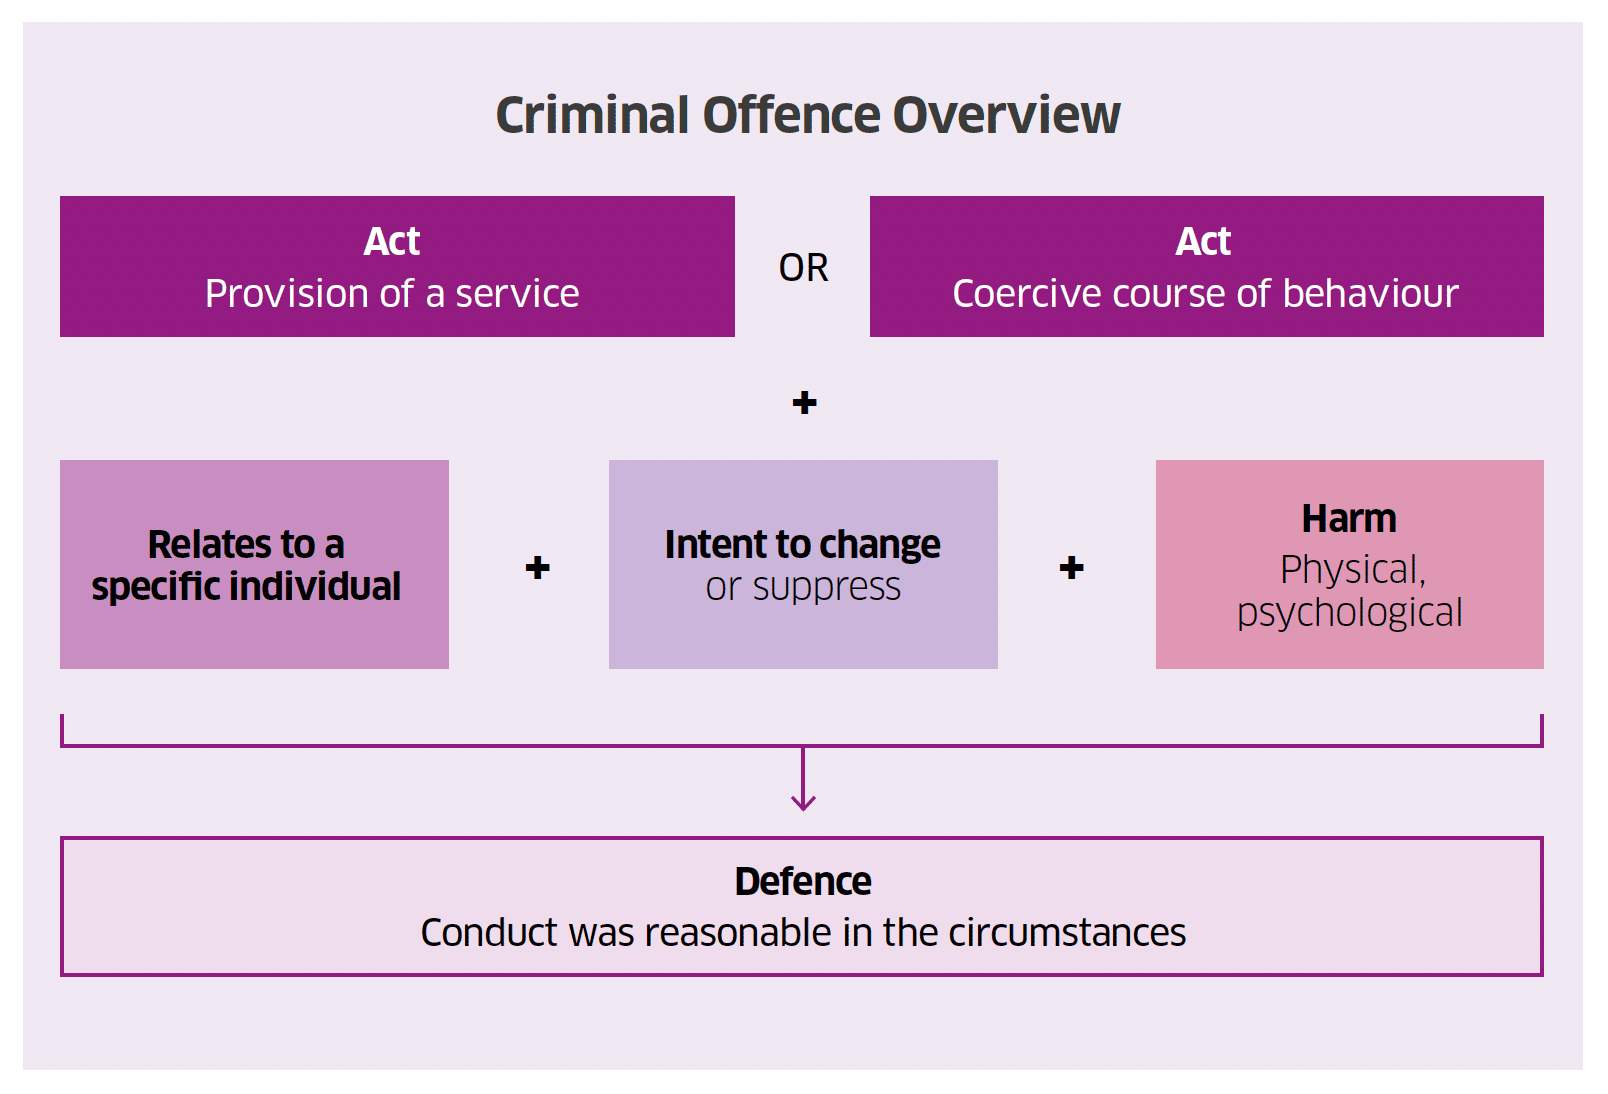 Overview of the key elements of the proposed criminal offence of engaging in conversion practices.